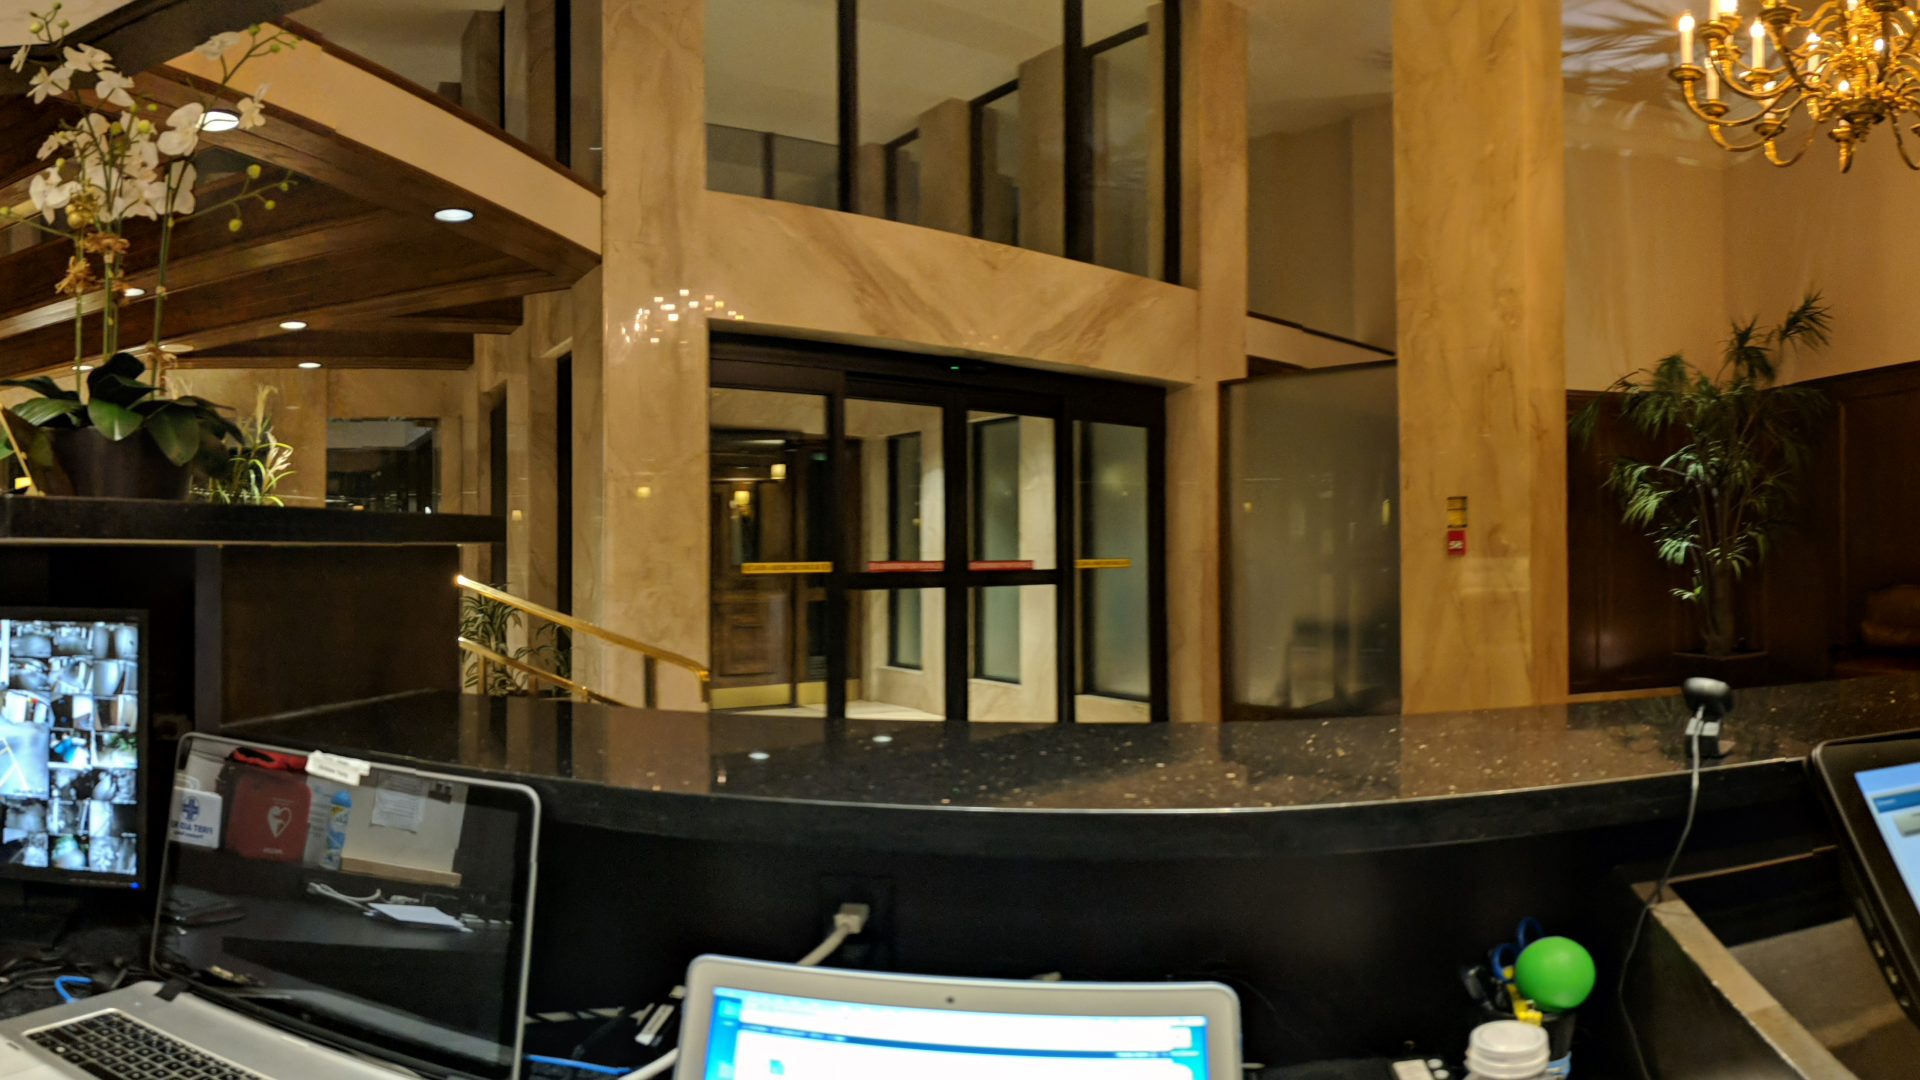 An image of an empty condo building lobby from the perspective of a security desk.